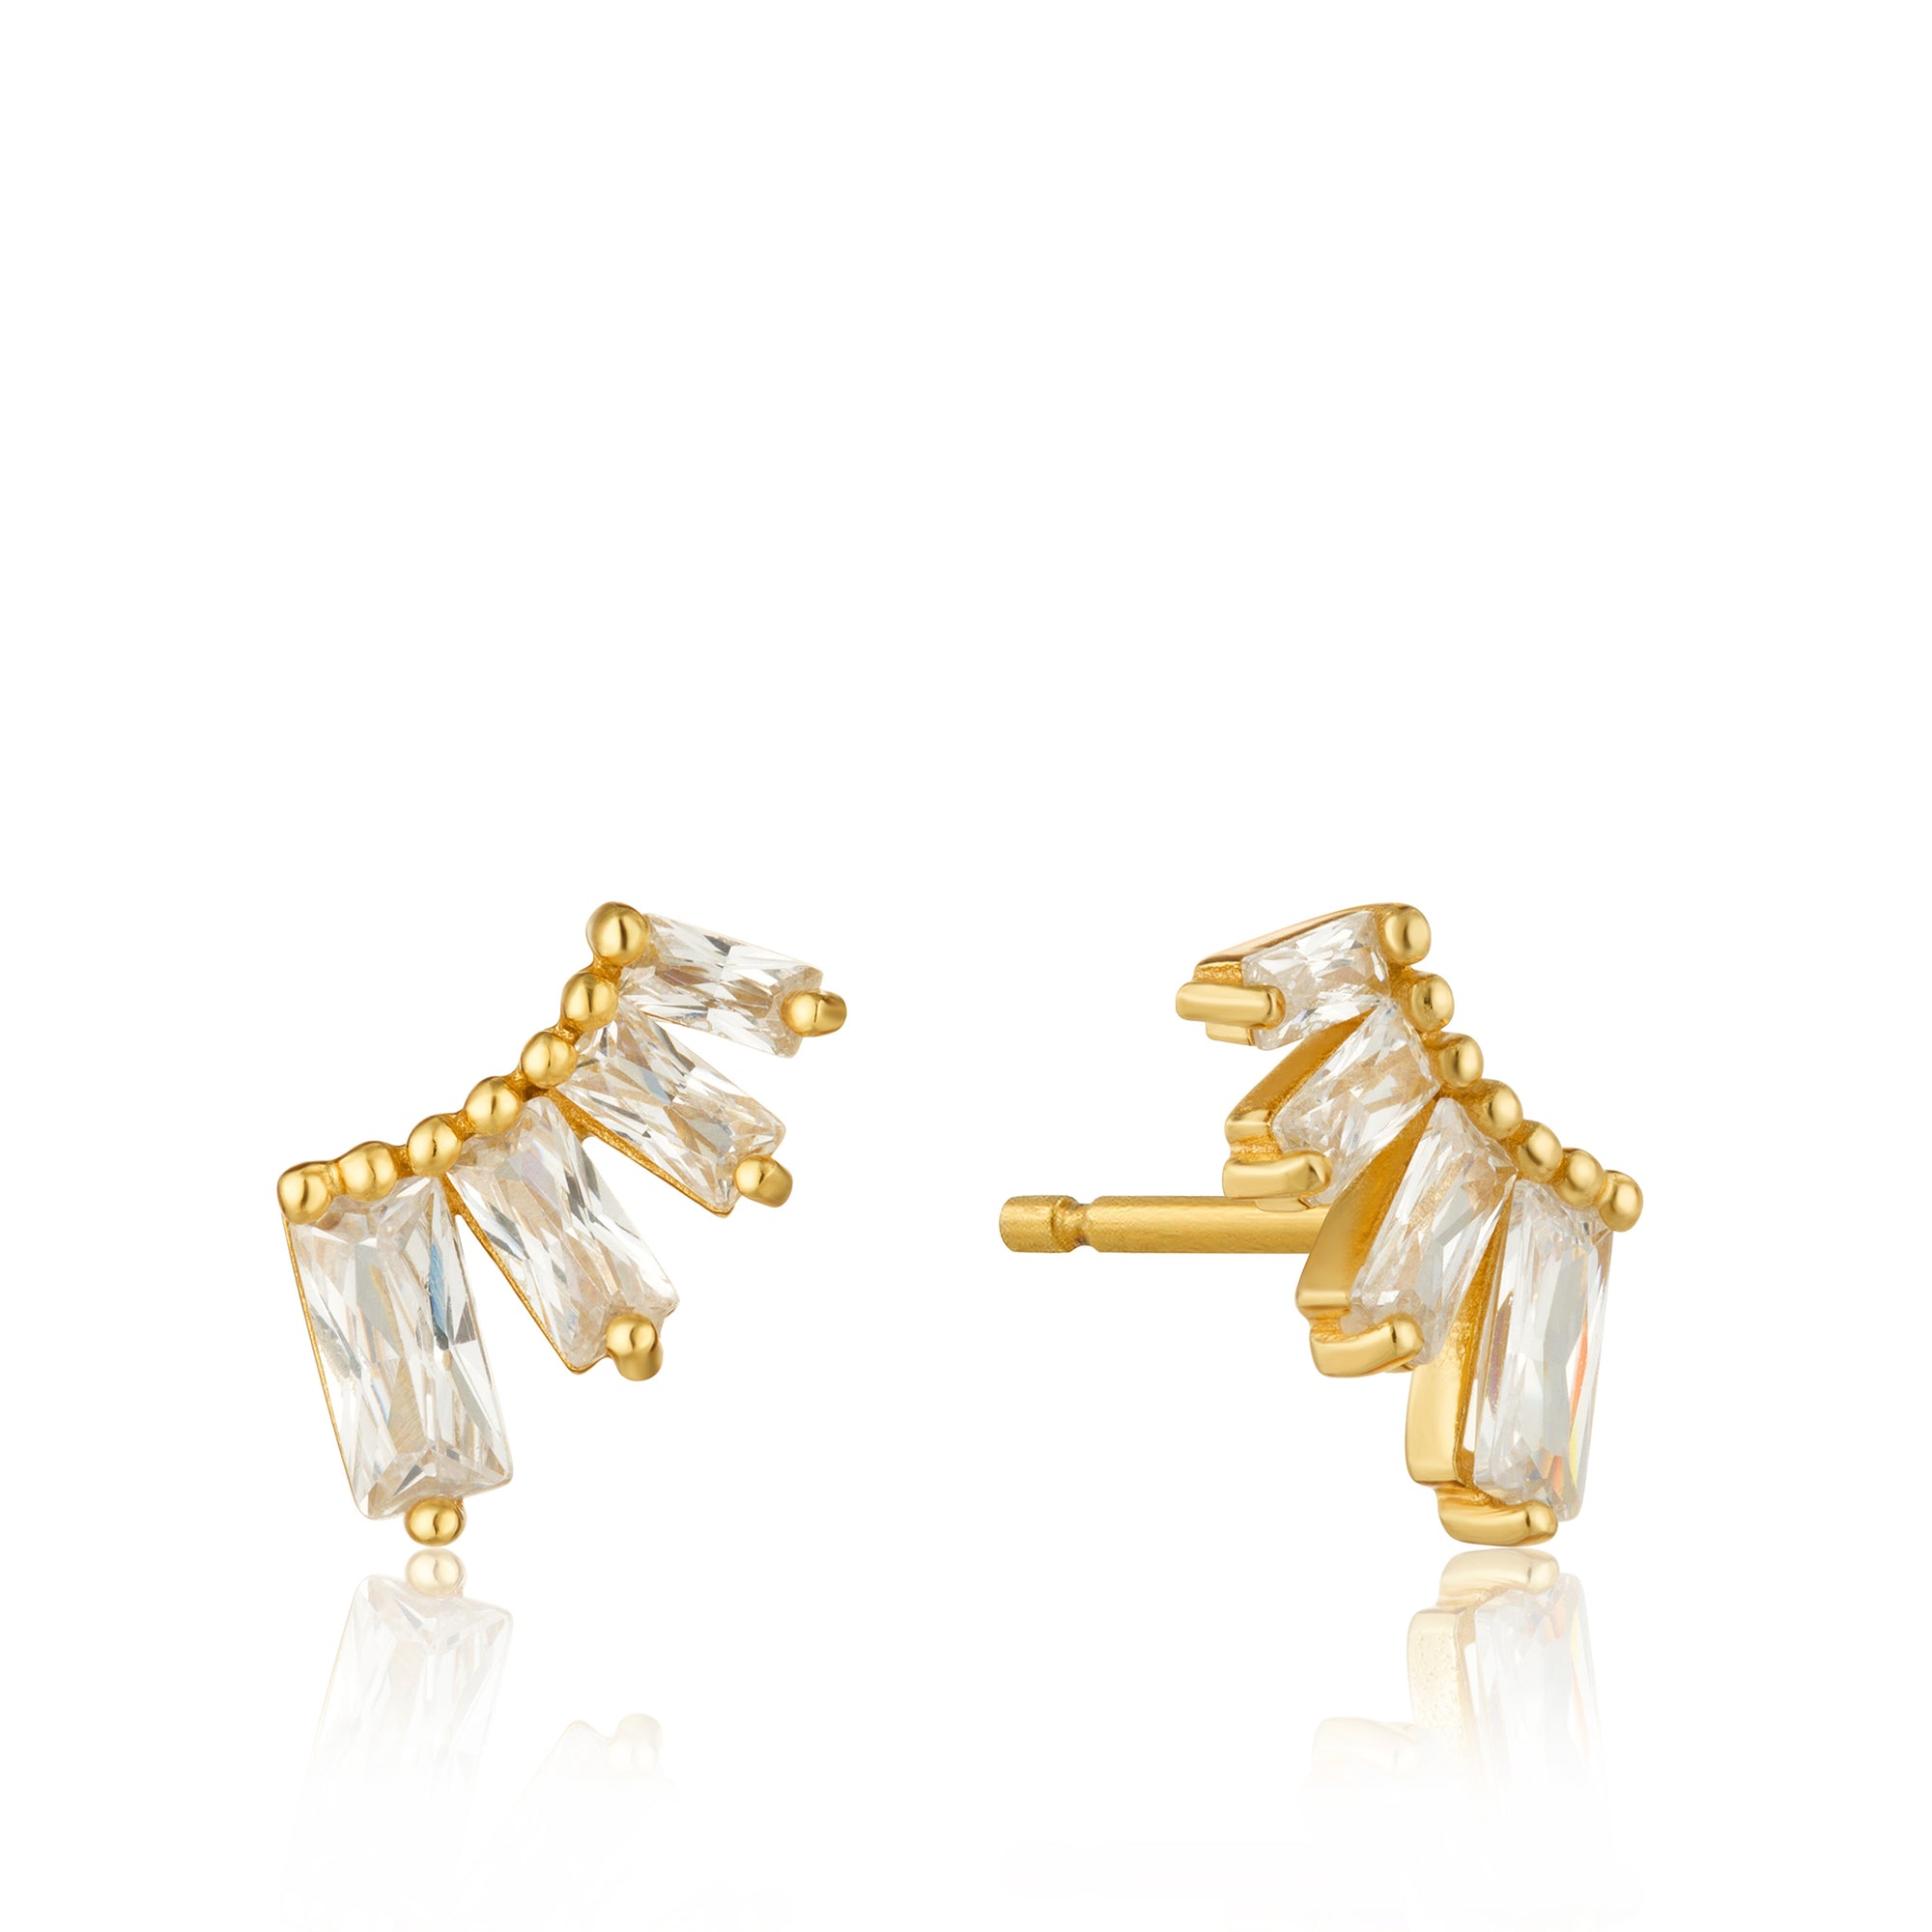 ANIA HAIE ANIA HAIE - Gold Glow Bar Stud Earrings available at The Good Life Boutique